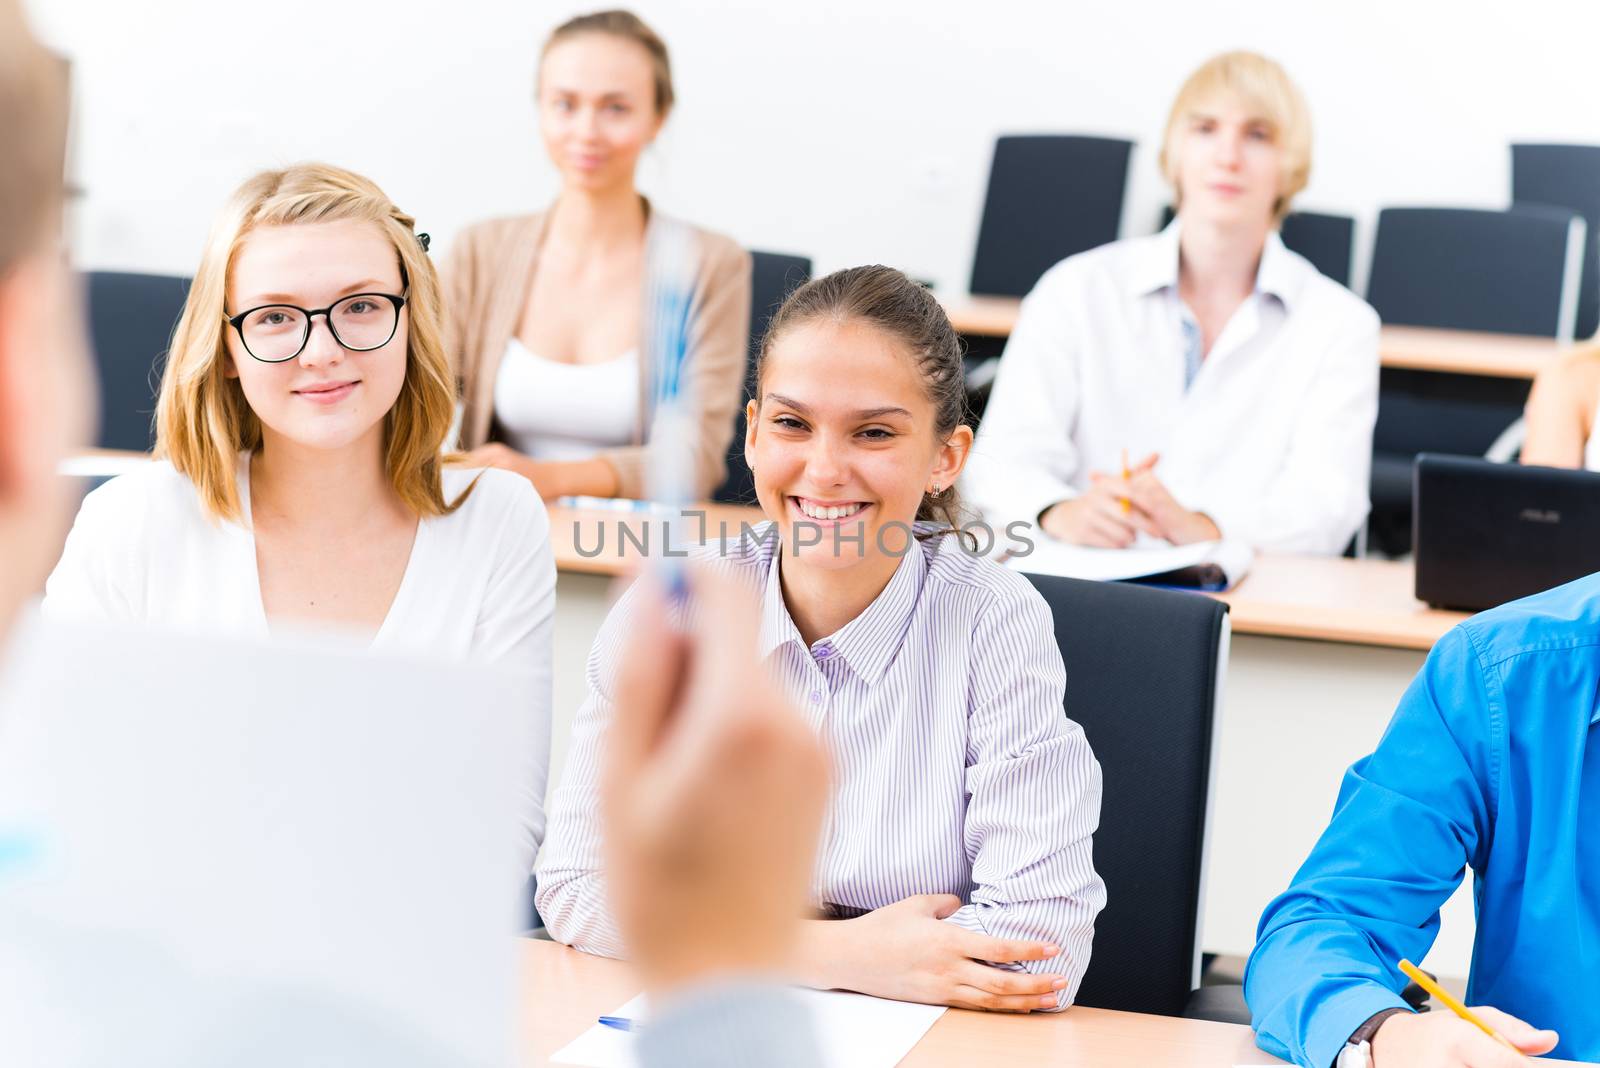 image of a students listen attentively to the teacher